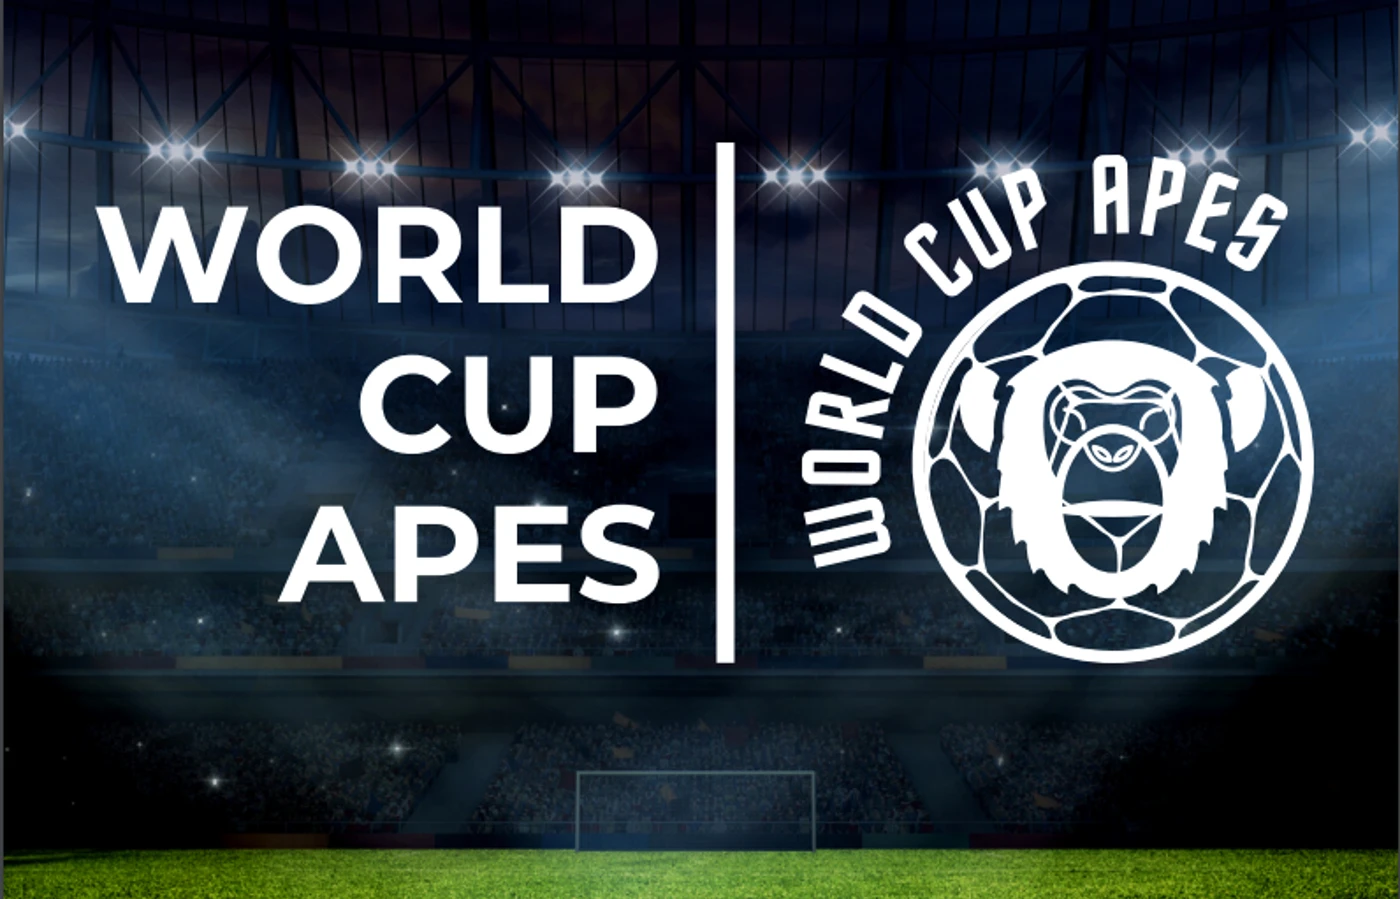 World Cup Apes